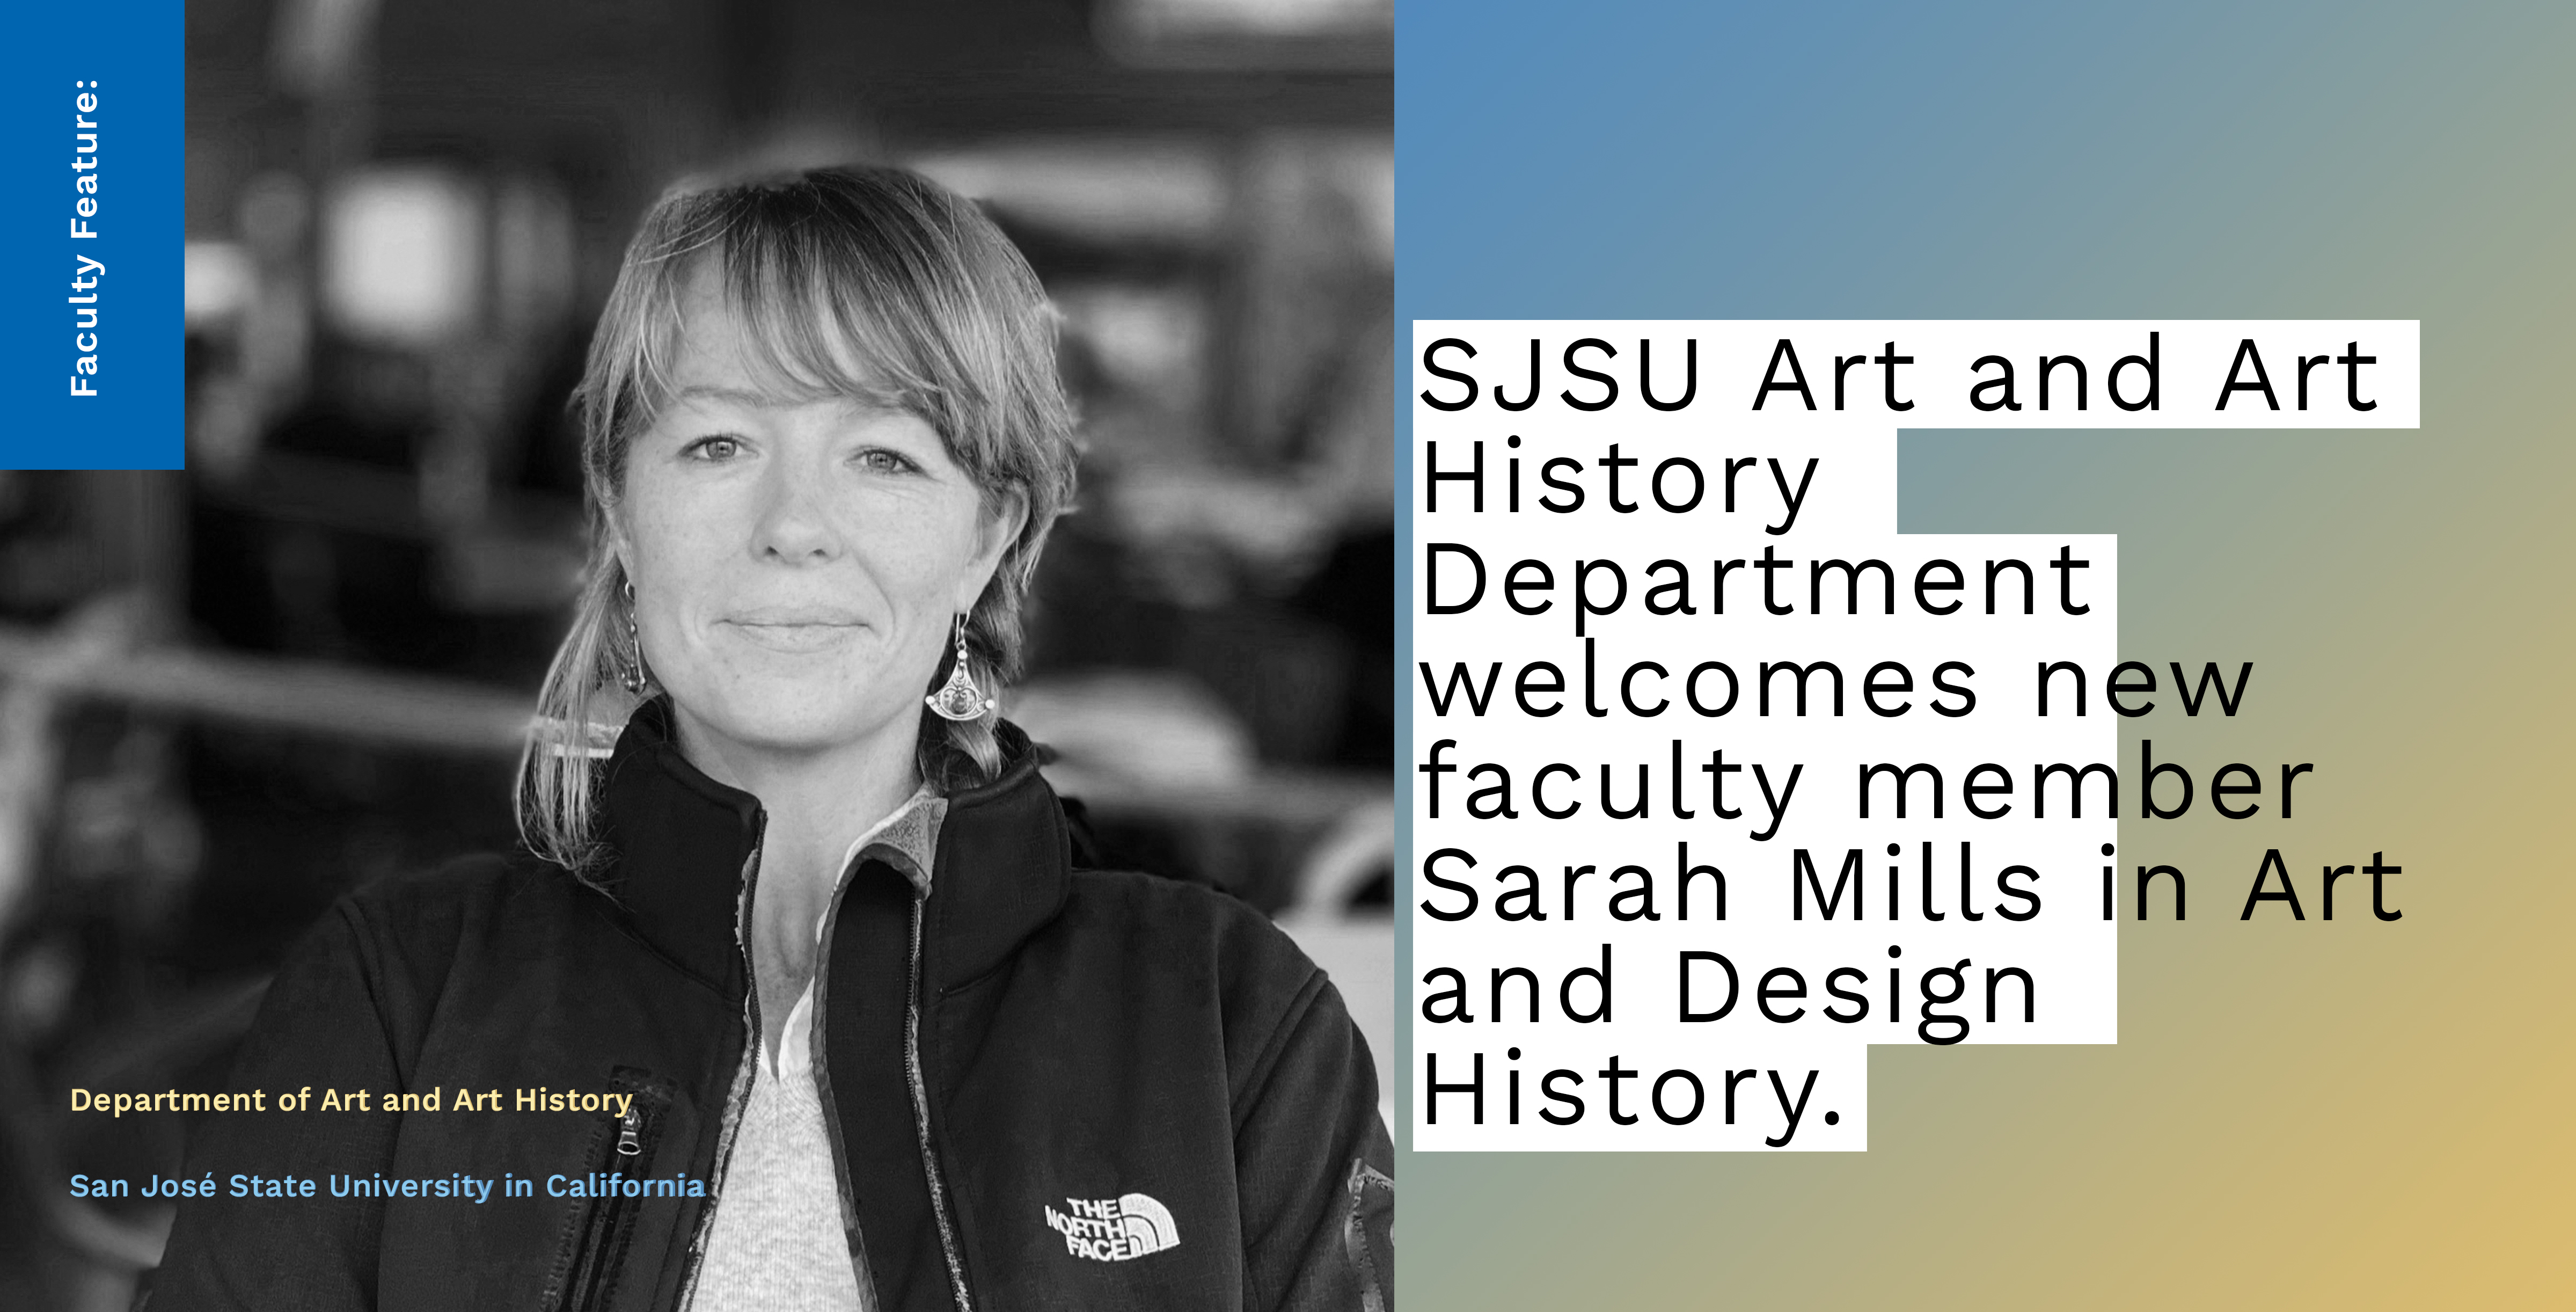 Descriptive Image – Art and Art History welcomes new faculty member Sarah Mills 